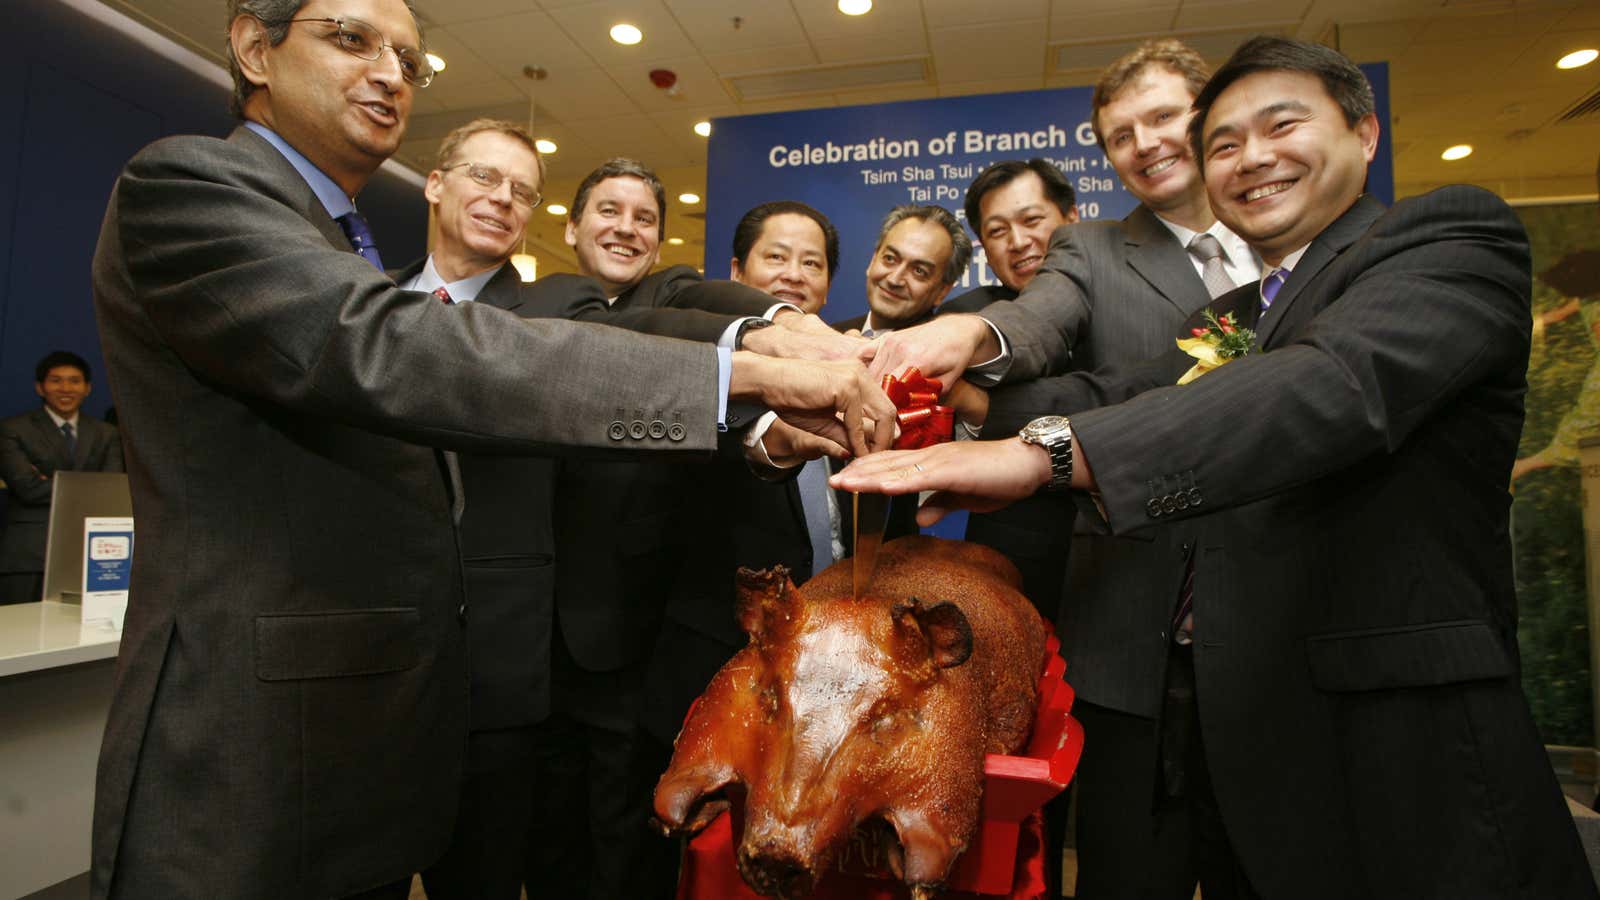 Citigroup executives, including Bird (second from right) celebrate the opening of a Hong Kong branch with a roast pig.